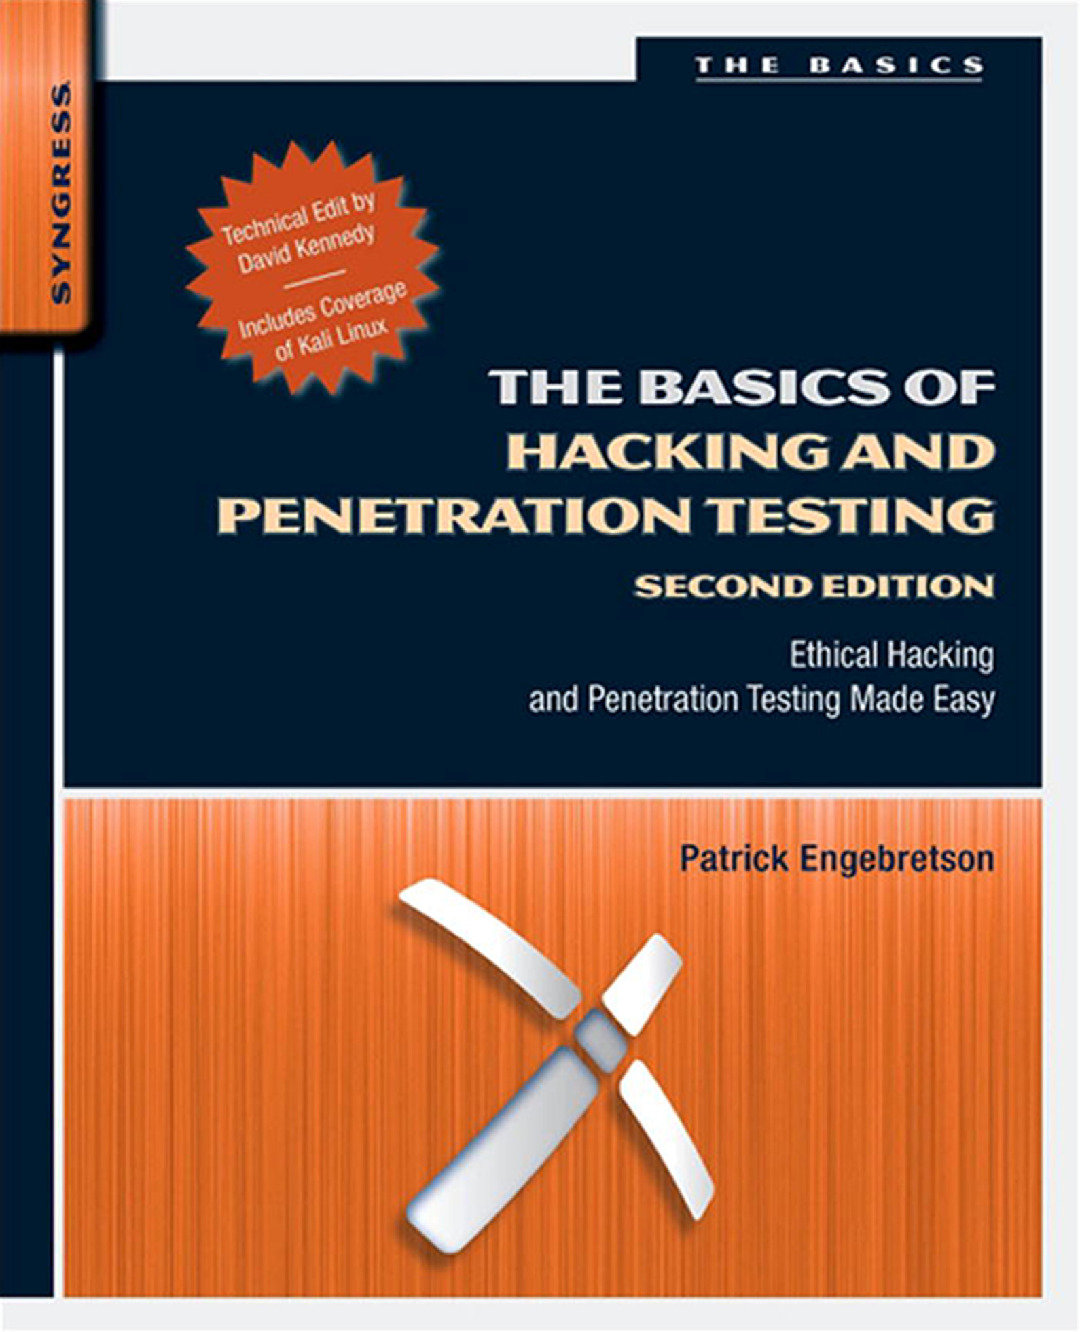 The Basics of Hacking and Penetration Testing, Second Edition